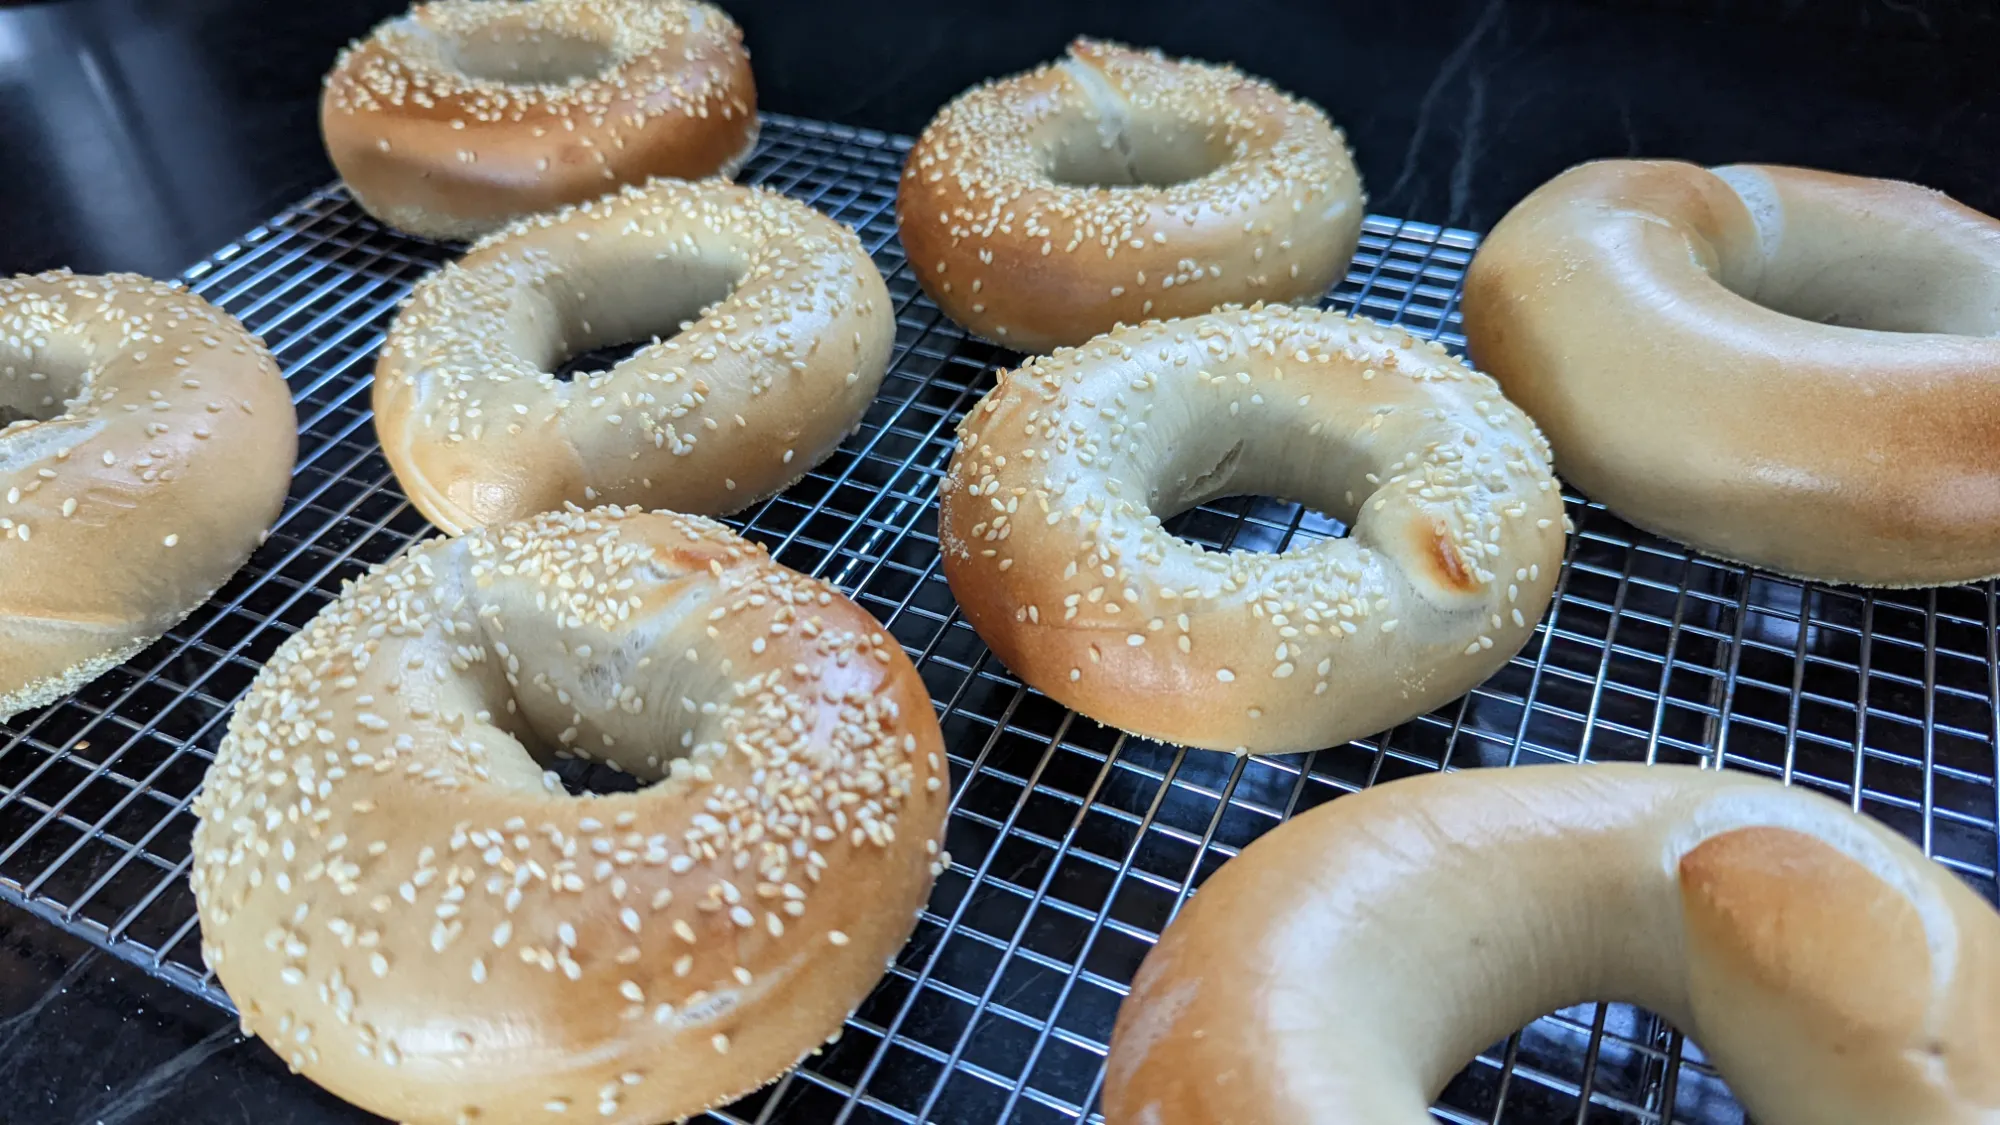 My first batch of bagels, cooling on a rack.